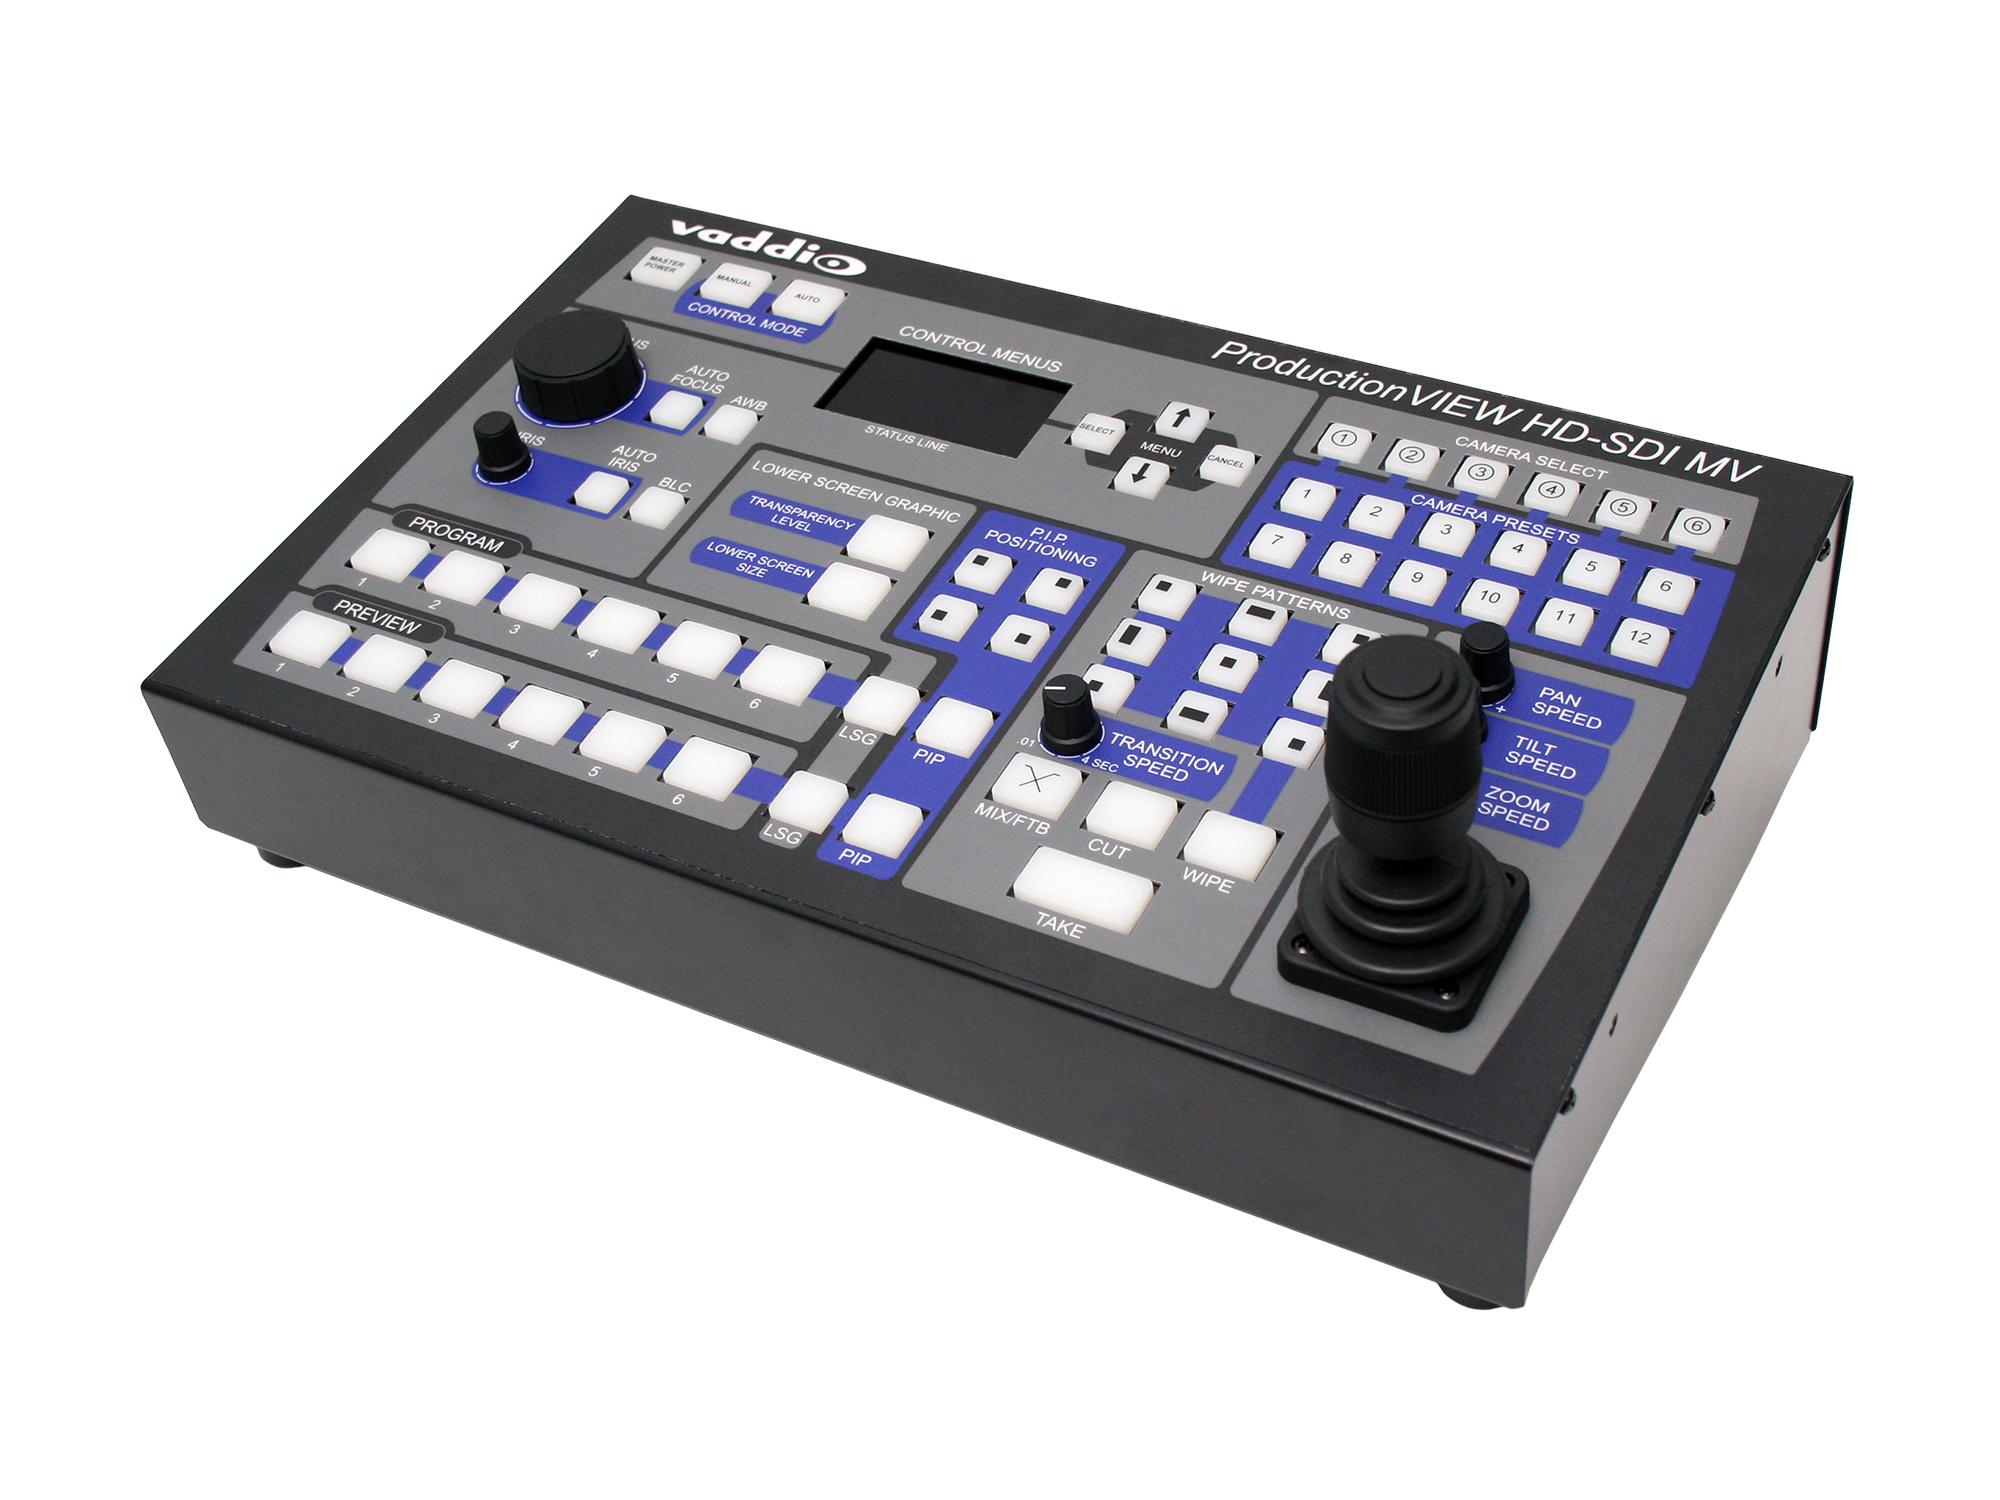 999-5655-000 ProductionVIEW HD-SDI MV All-in-One Camera Control Console with Video Switching/Mixing by Vaddio